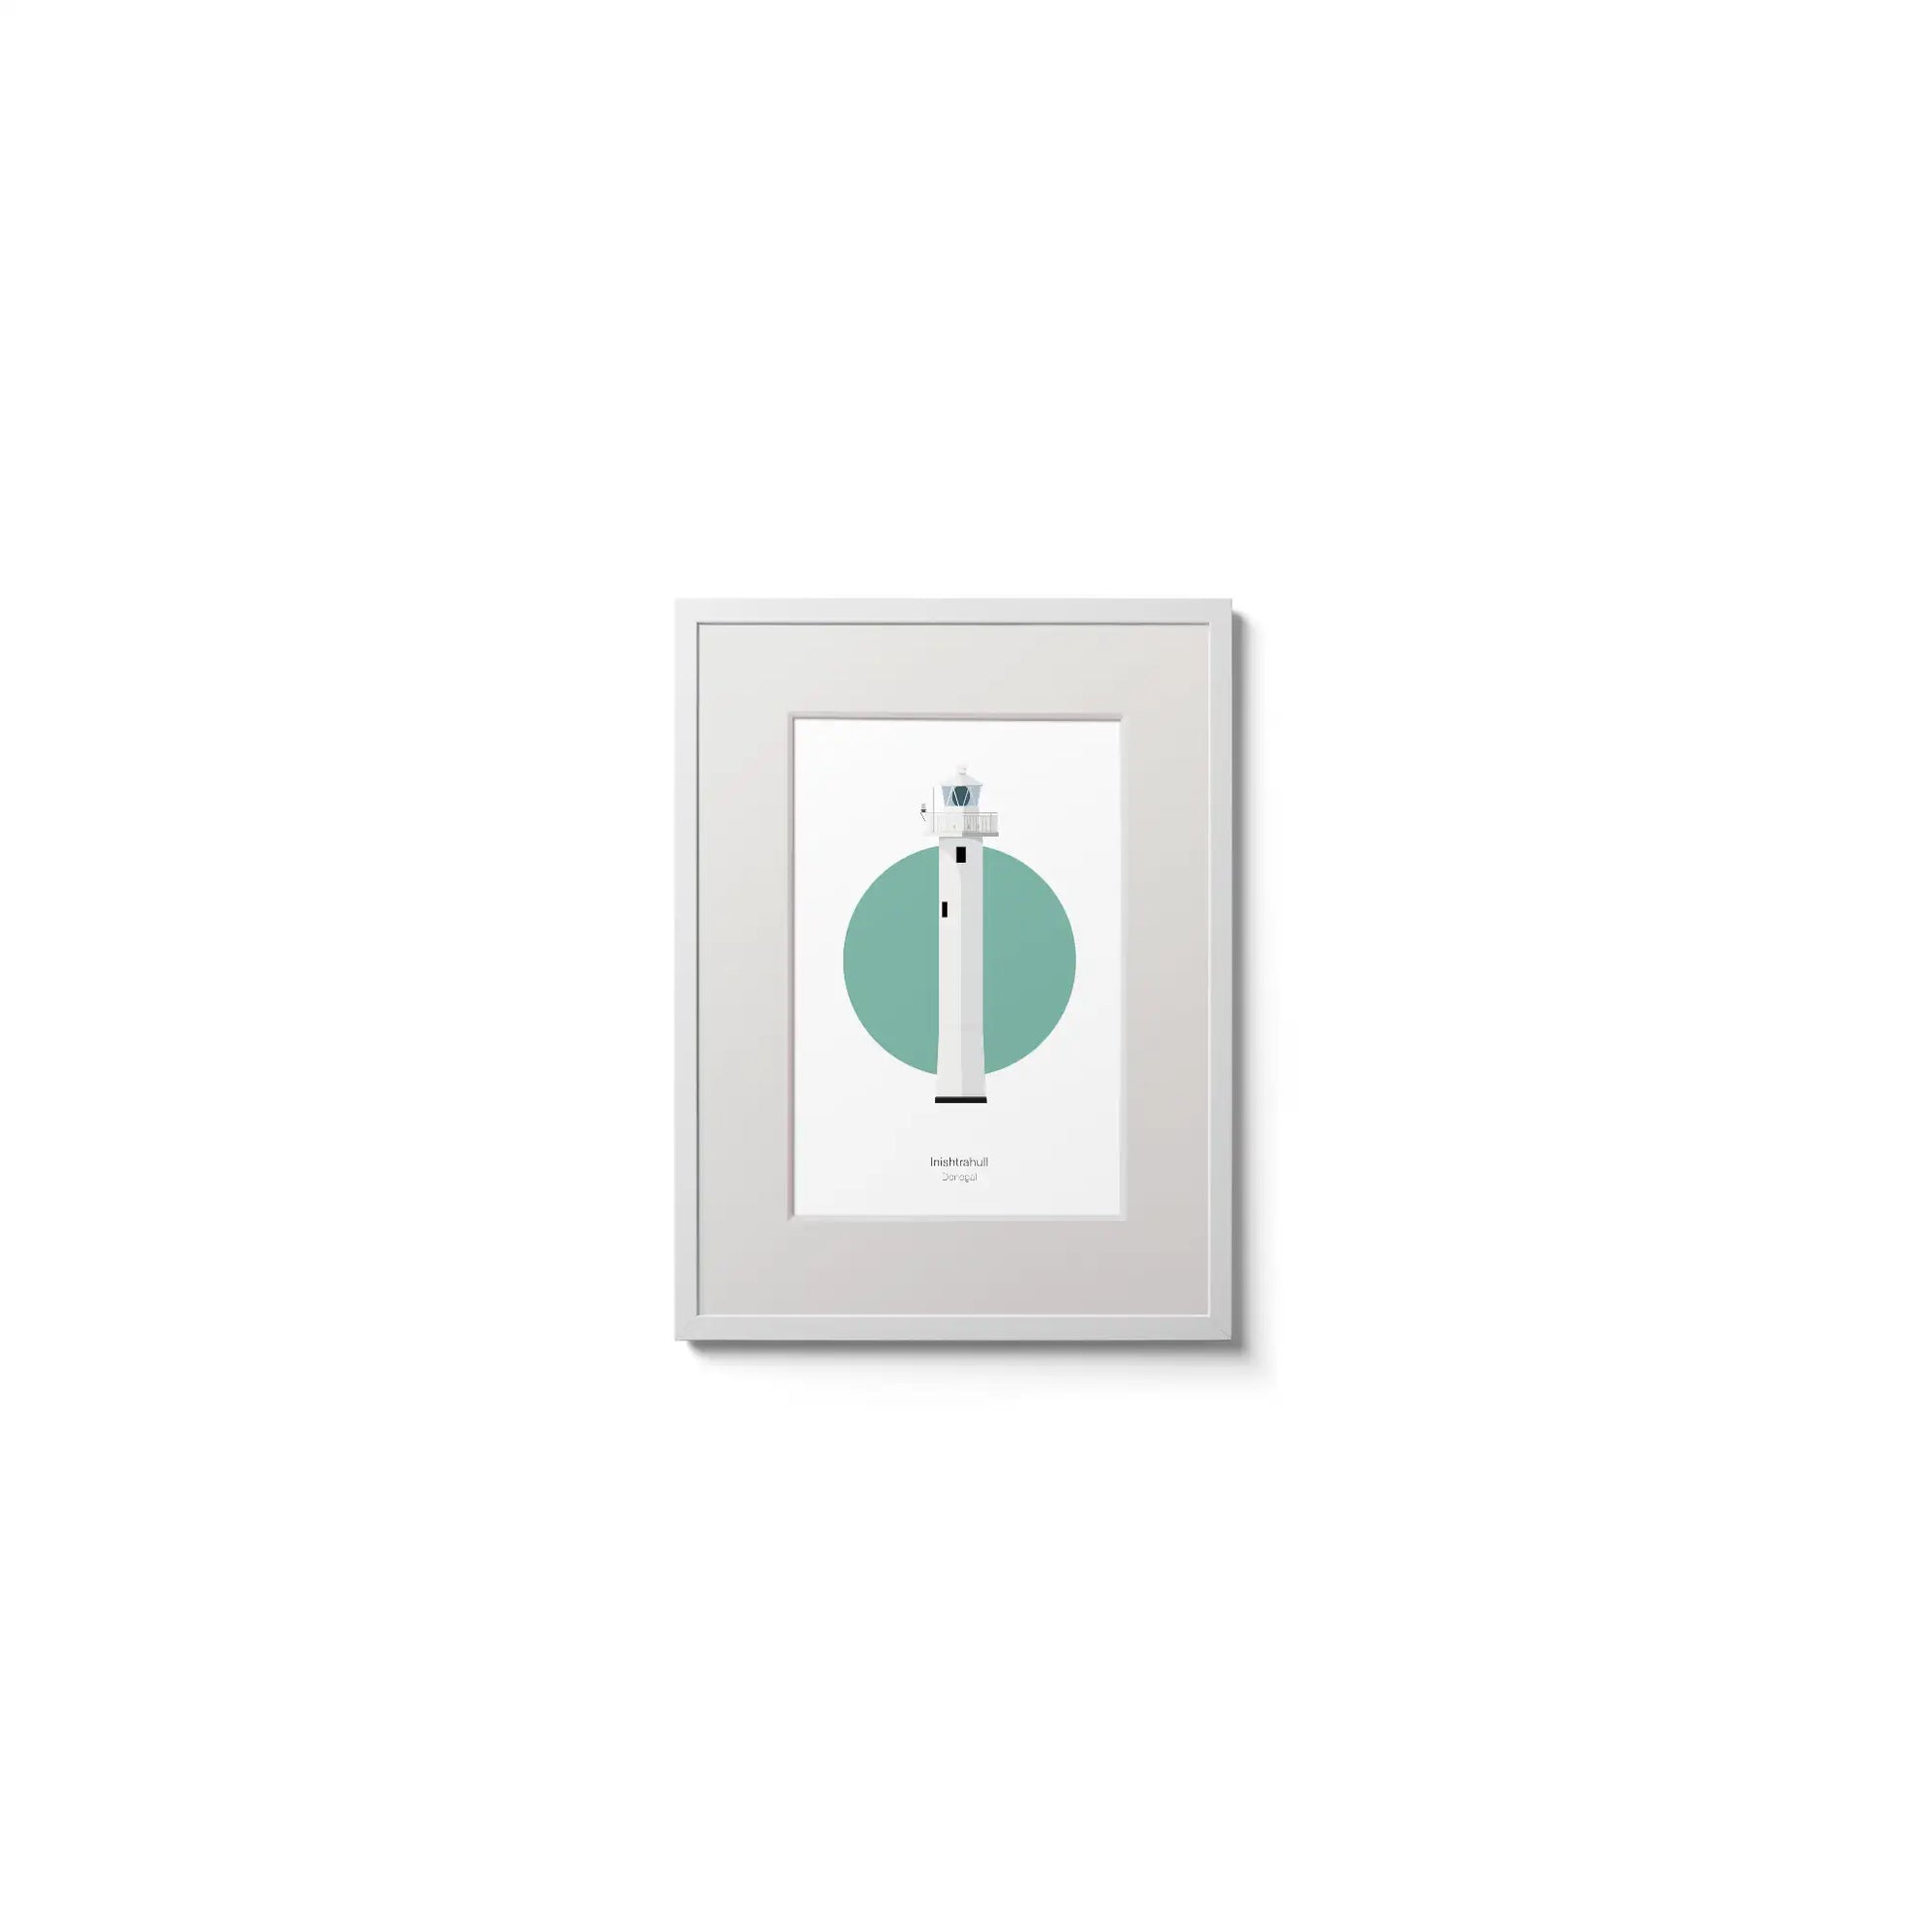 Contemporary graphic illustration of Inishtrahull lighthouse on a white background inside light blue square,  in a white frame measuring 15x20cm.